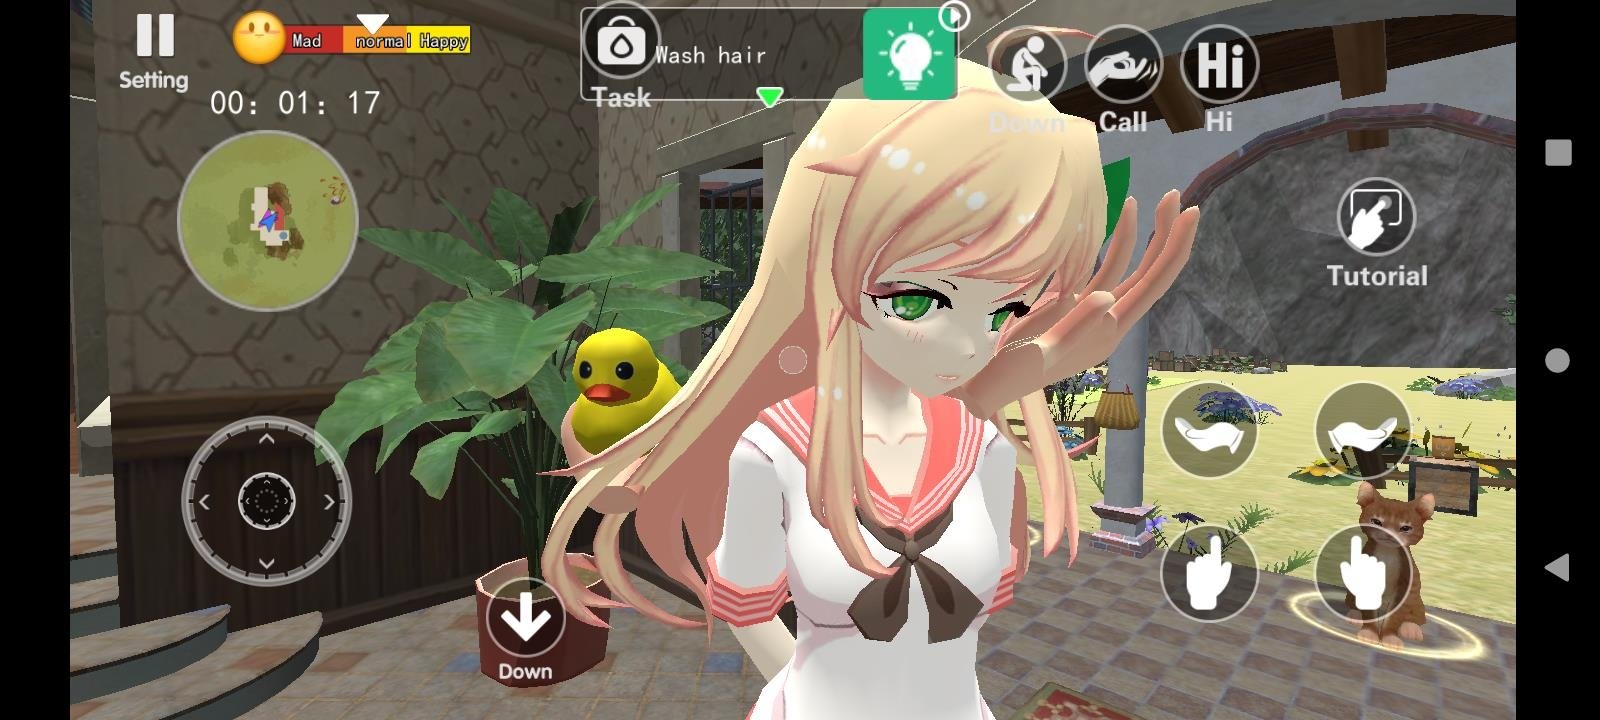 App Ada Life: adorable vr girl Android game 2023 